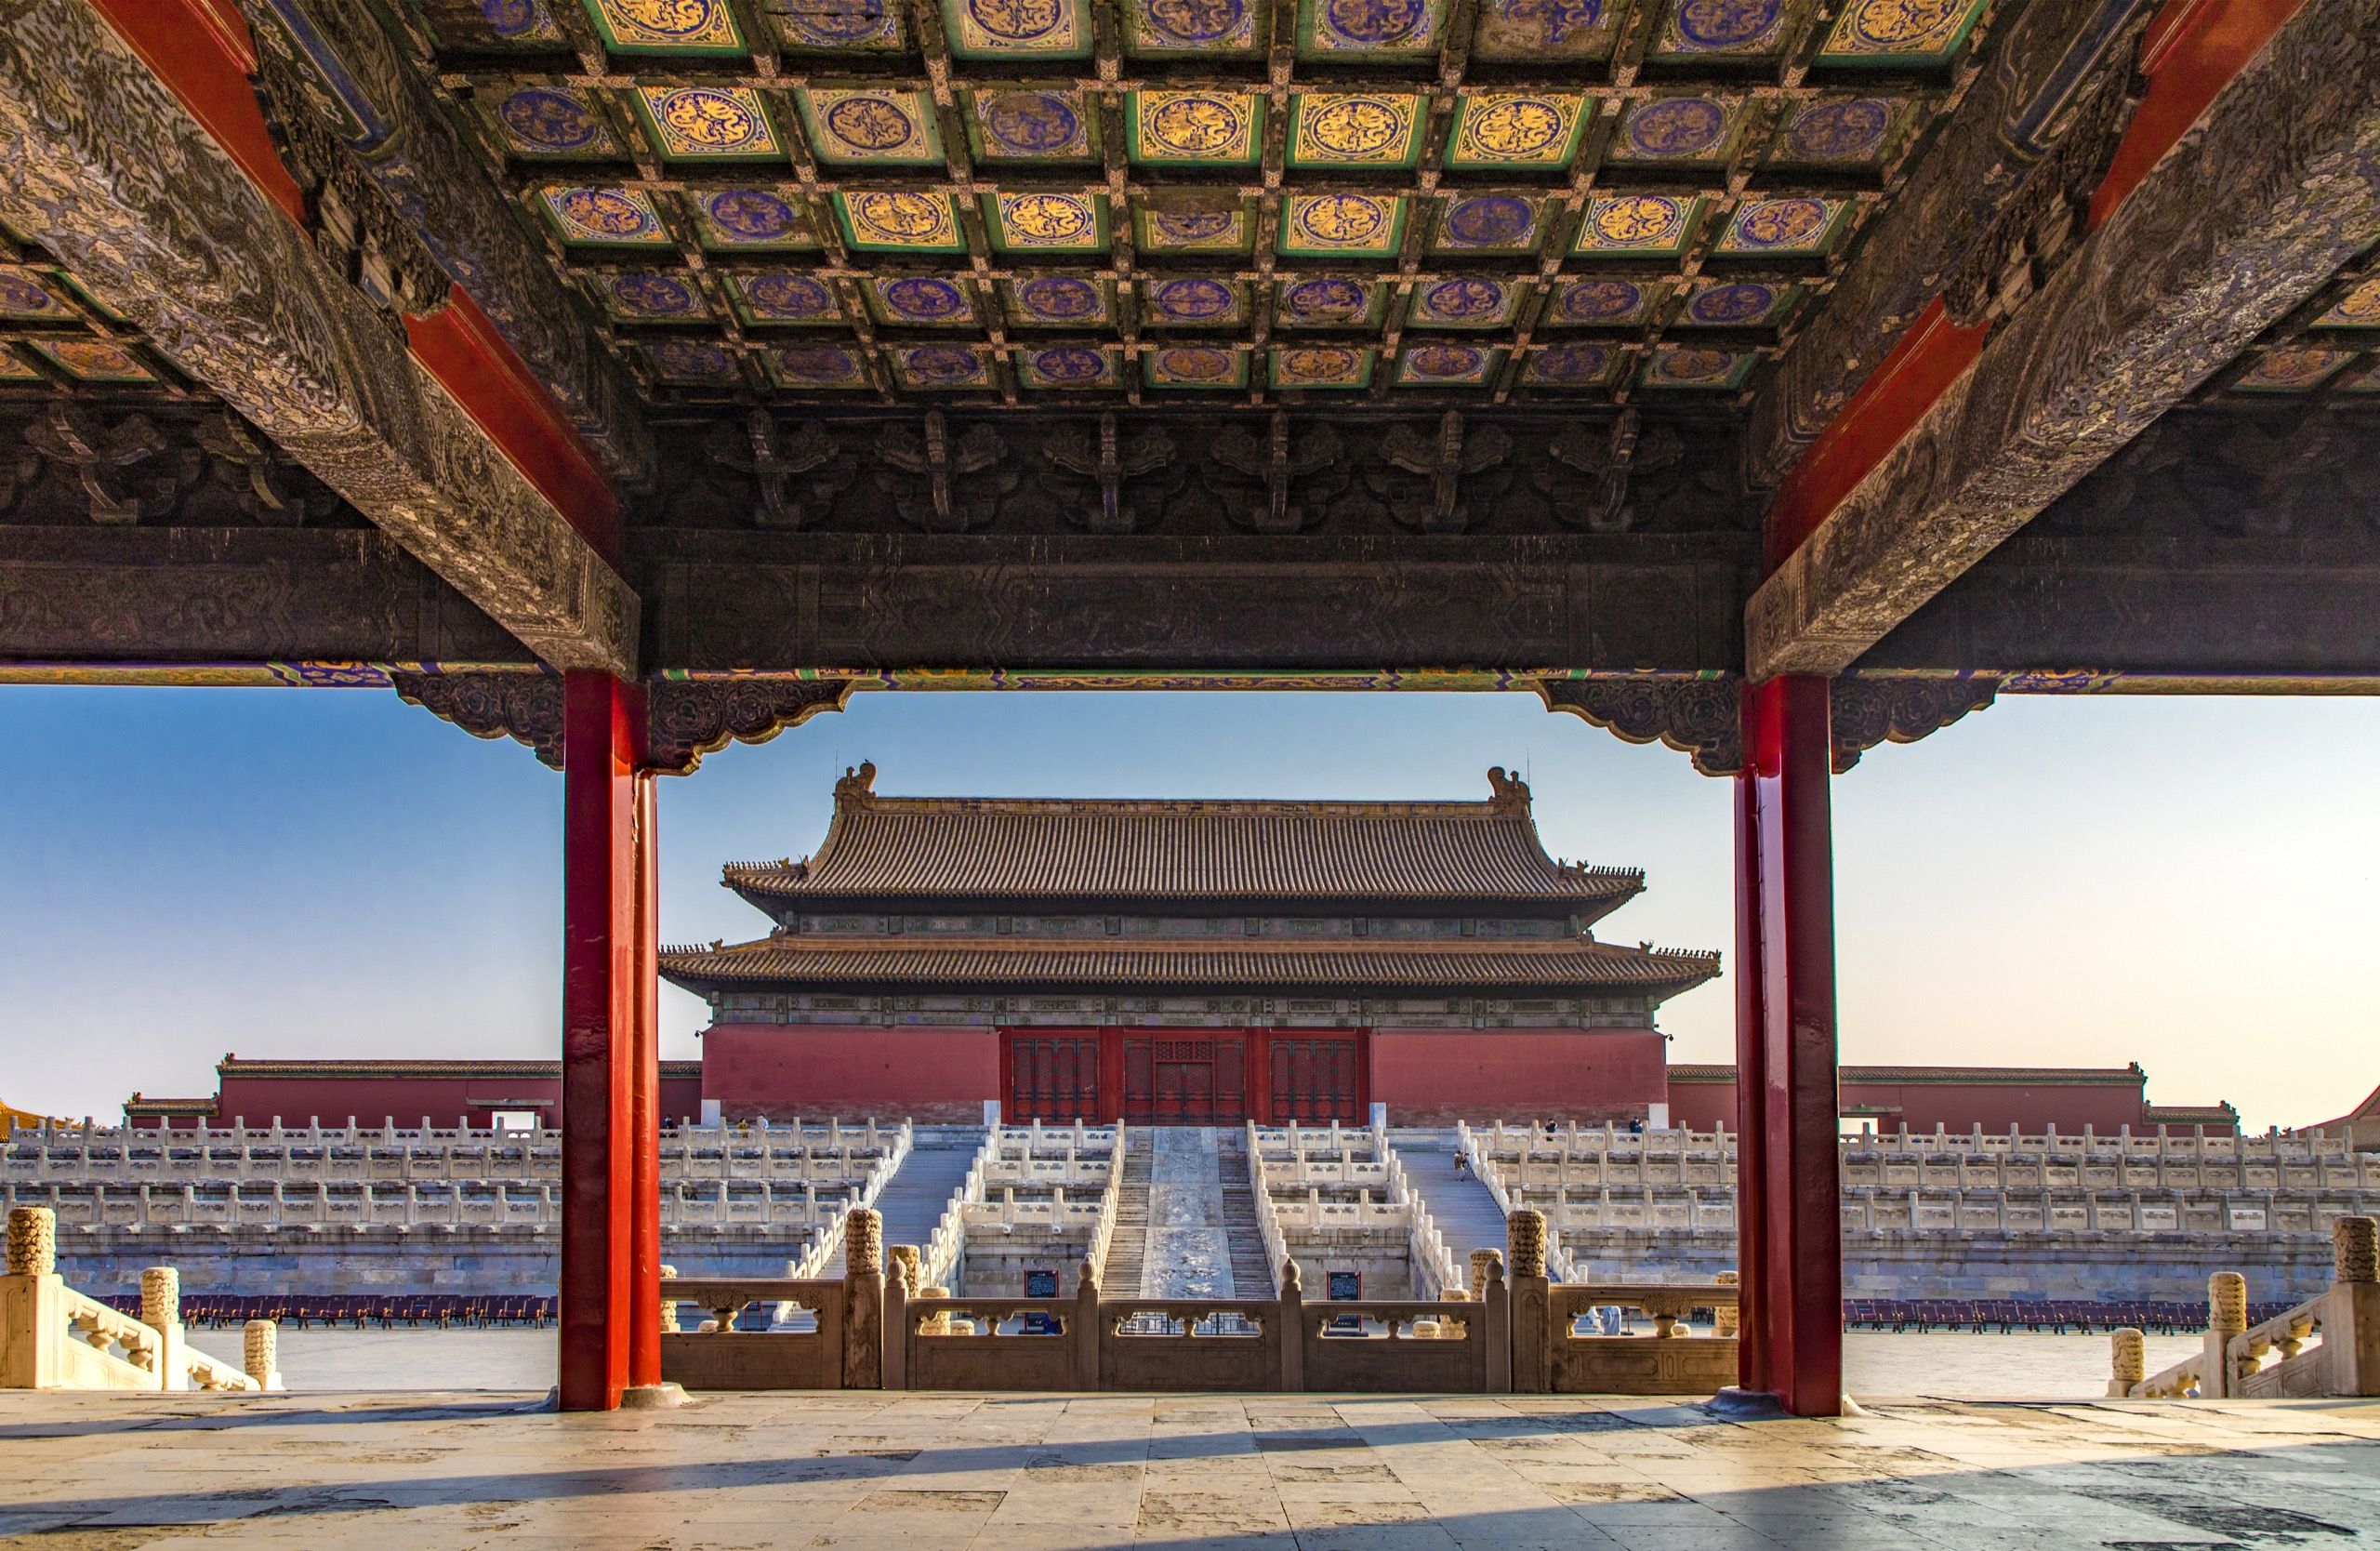 How did the Forbidden City Become a Public Museum?